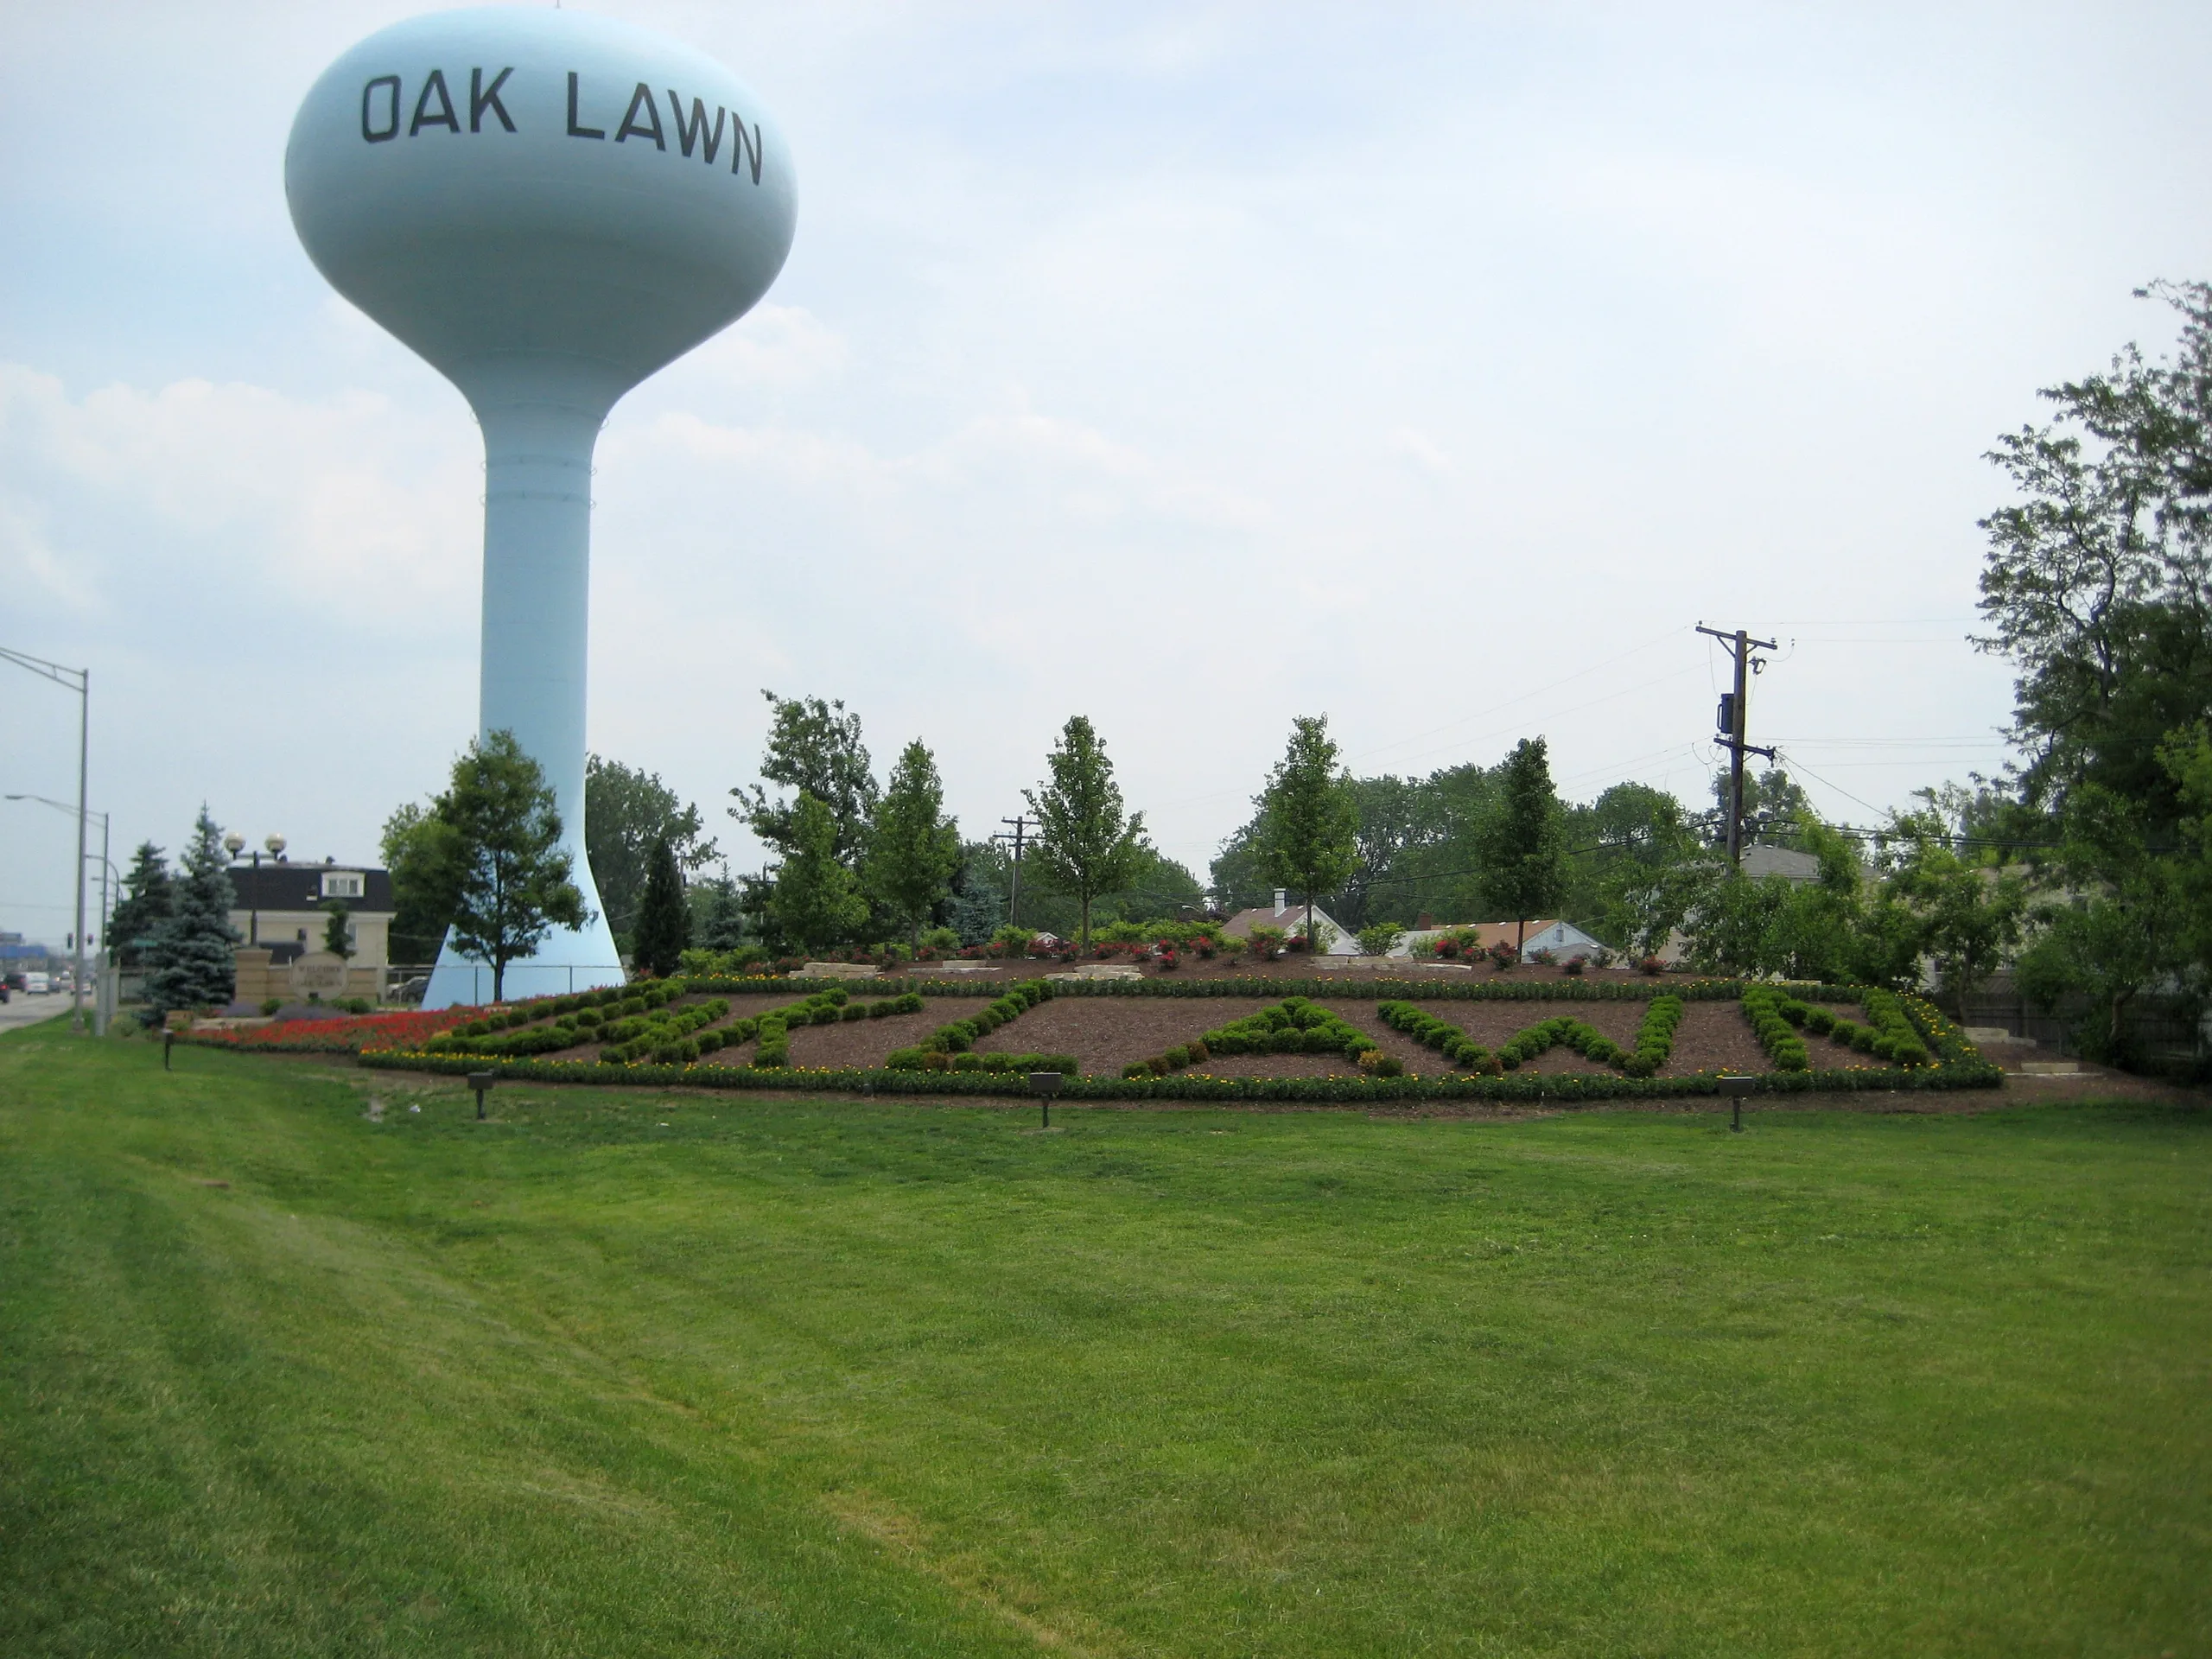 Oak Lawn, Illinois photo of local water tower and park